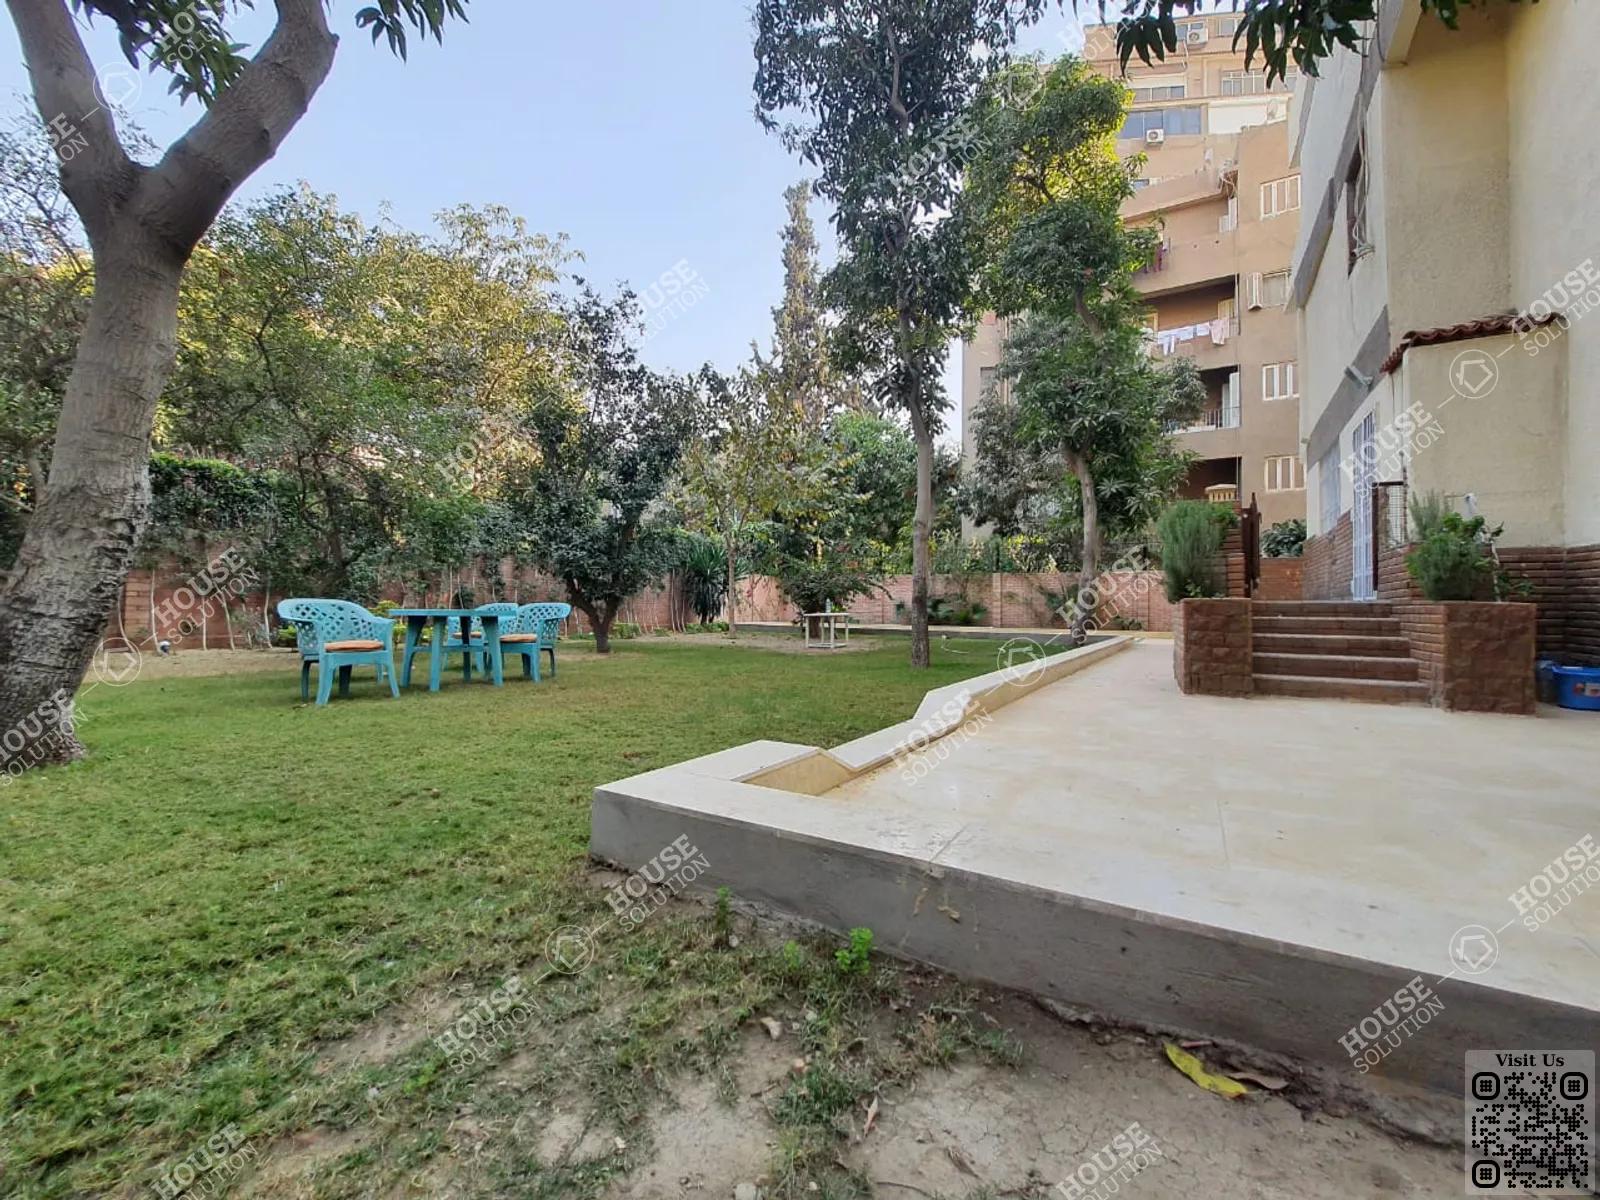 PRIVATE GARDEN  @ Ground Floors For Rent In Maadi Maadi Degla Area: 250 m² consists of 3 Bedrooms 2 Bathrooms Modern furnished 5 stars #4826-0